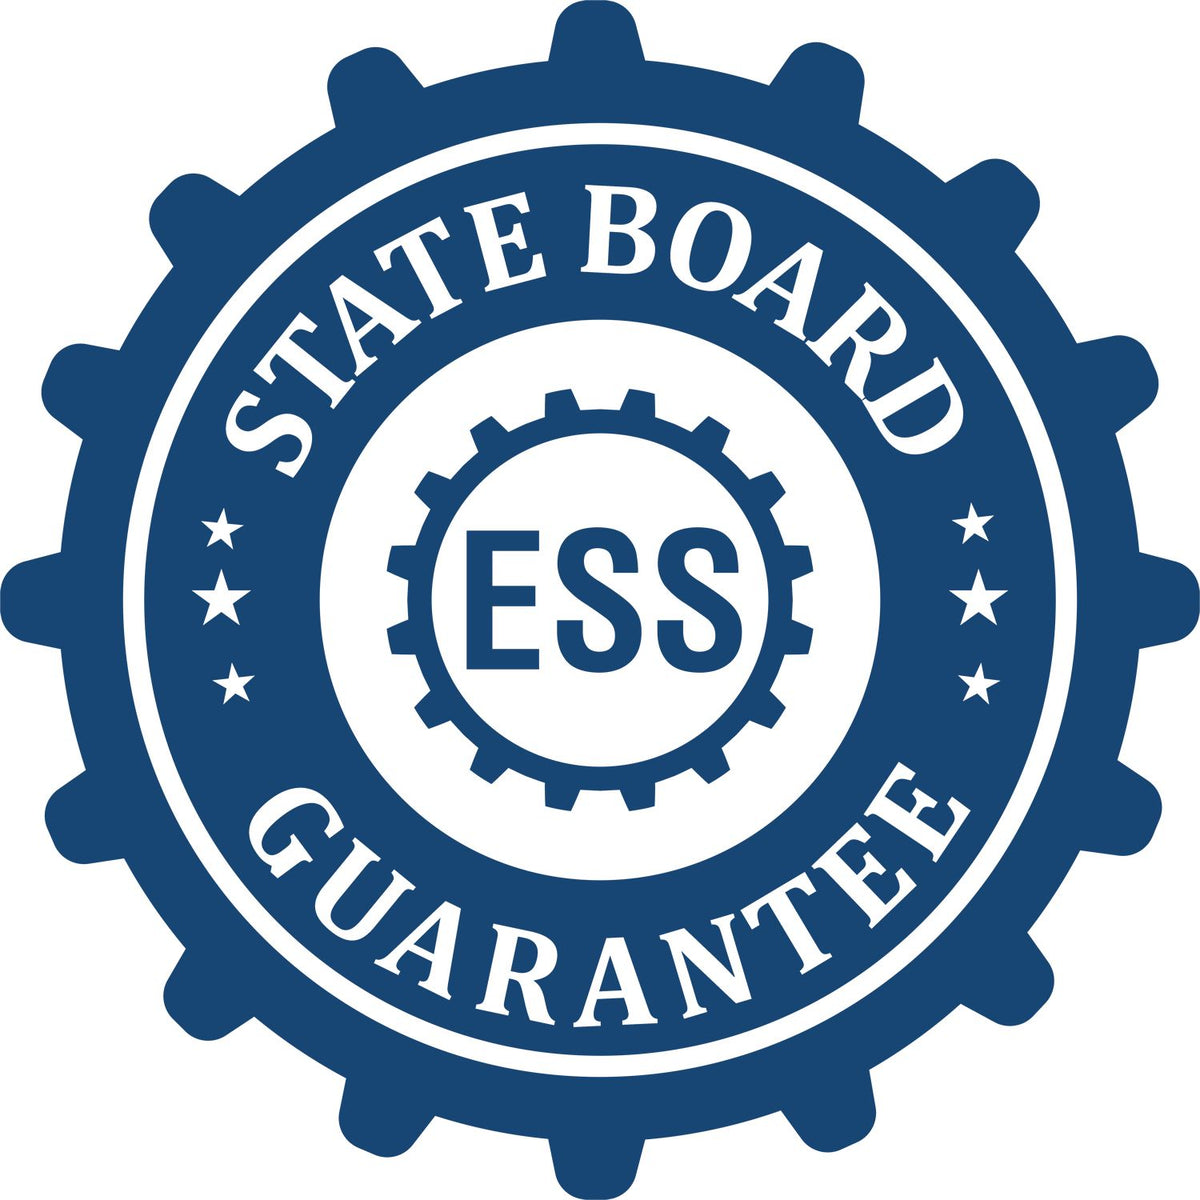 An emblem in a gear shape illustrating a state board guarantee for the State of Indiana Extended Long Reach Geologist Seal